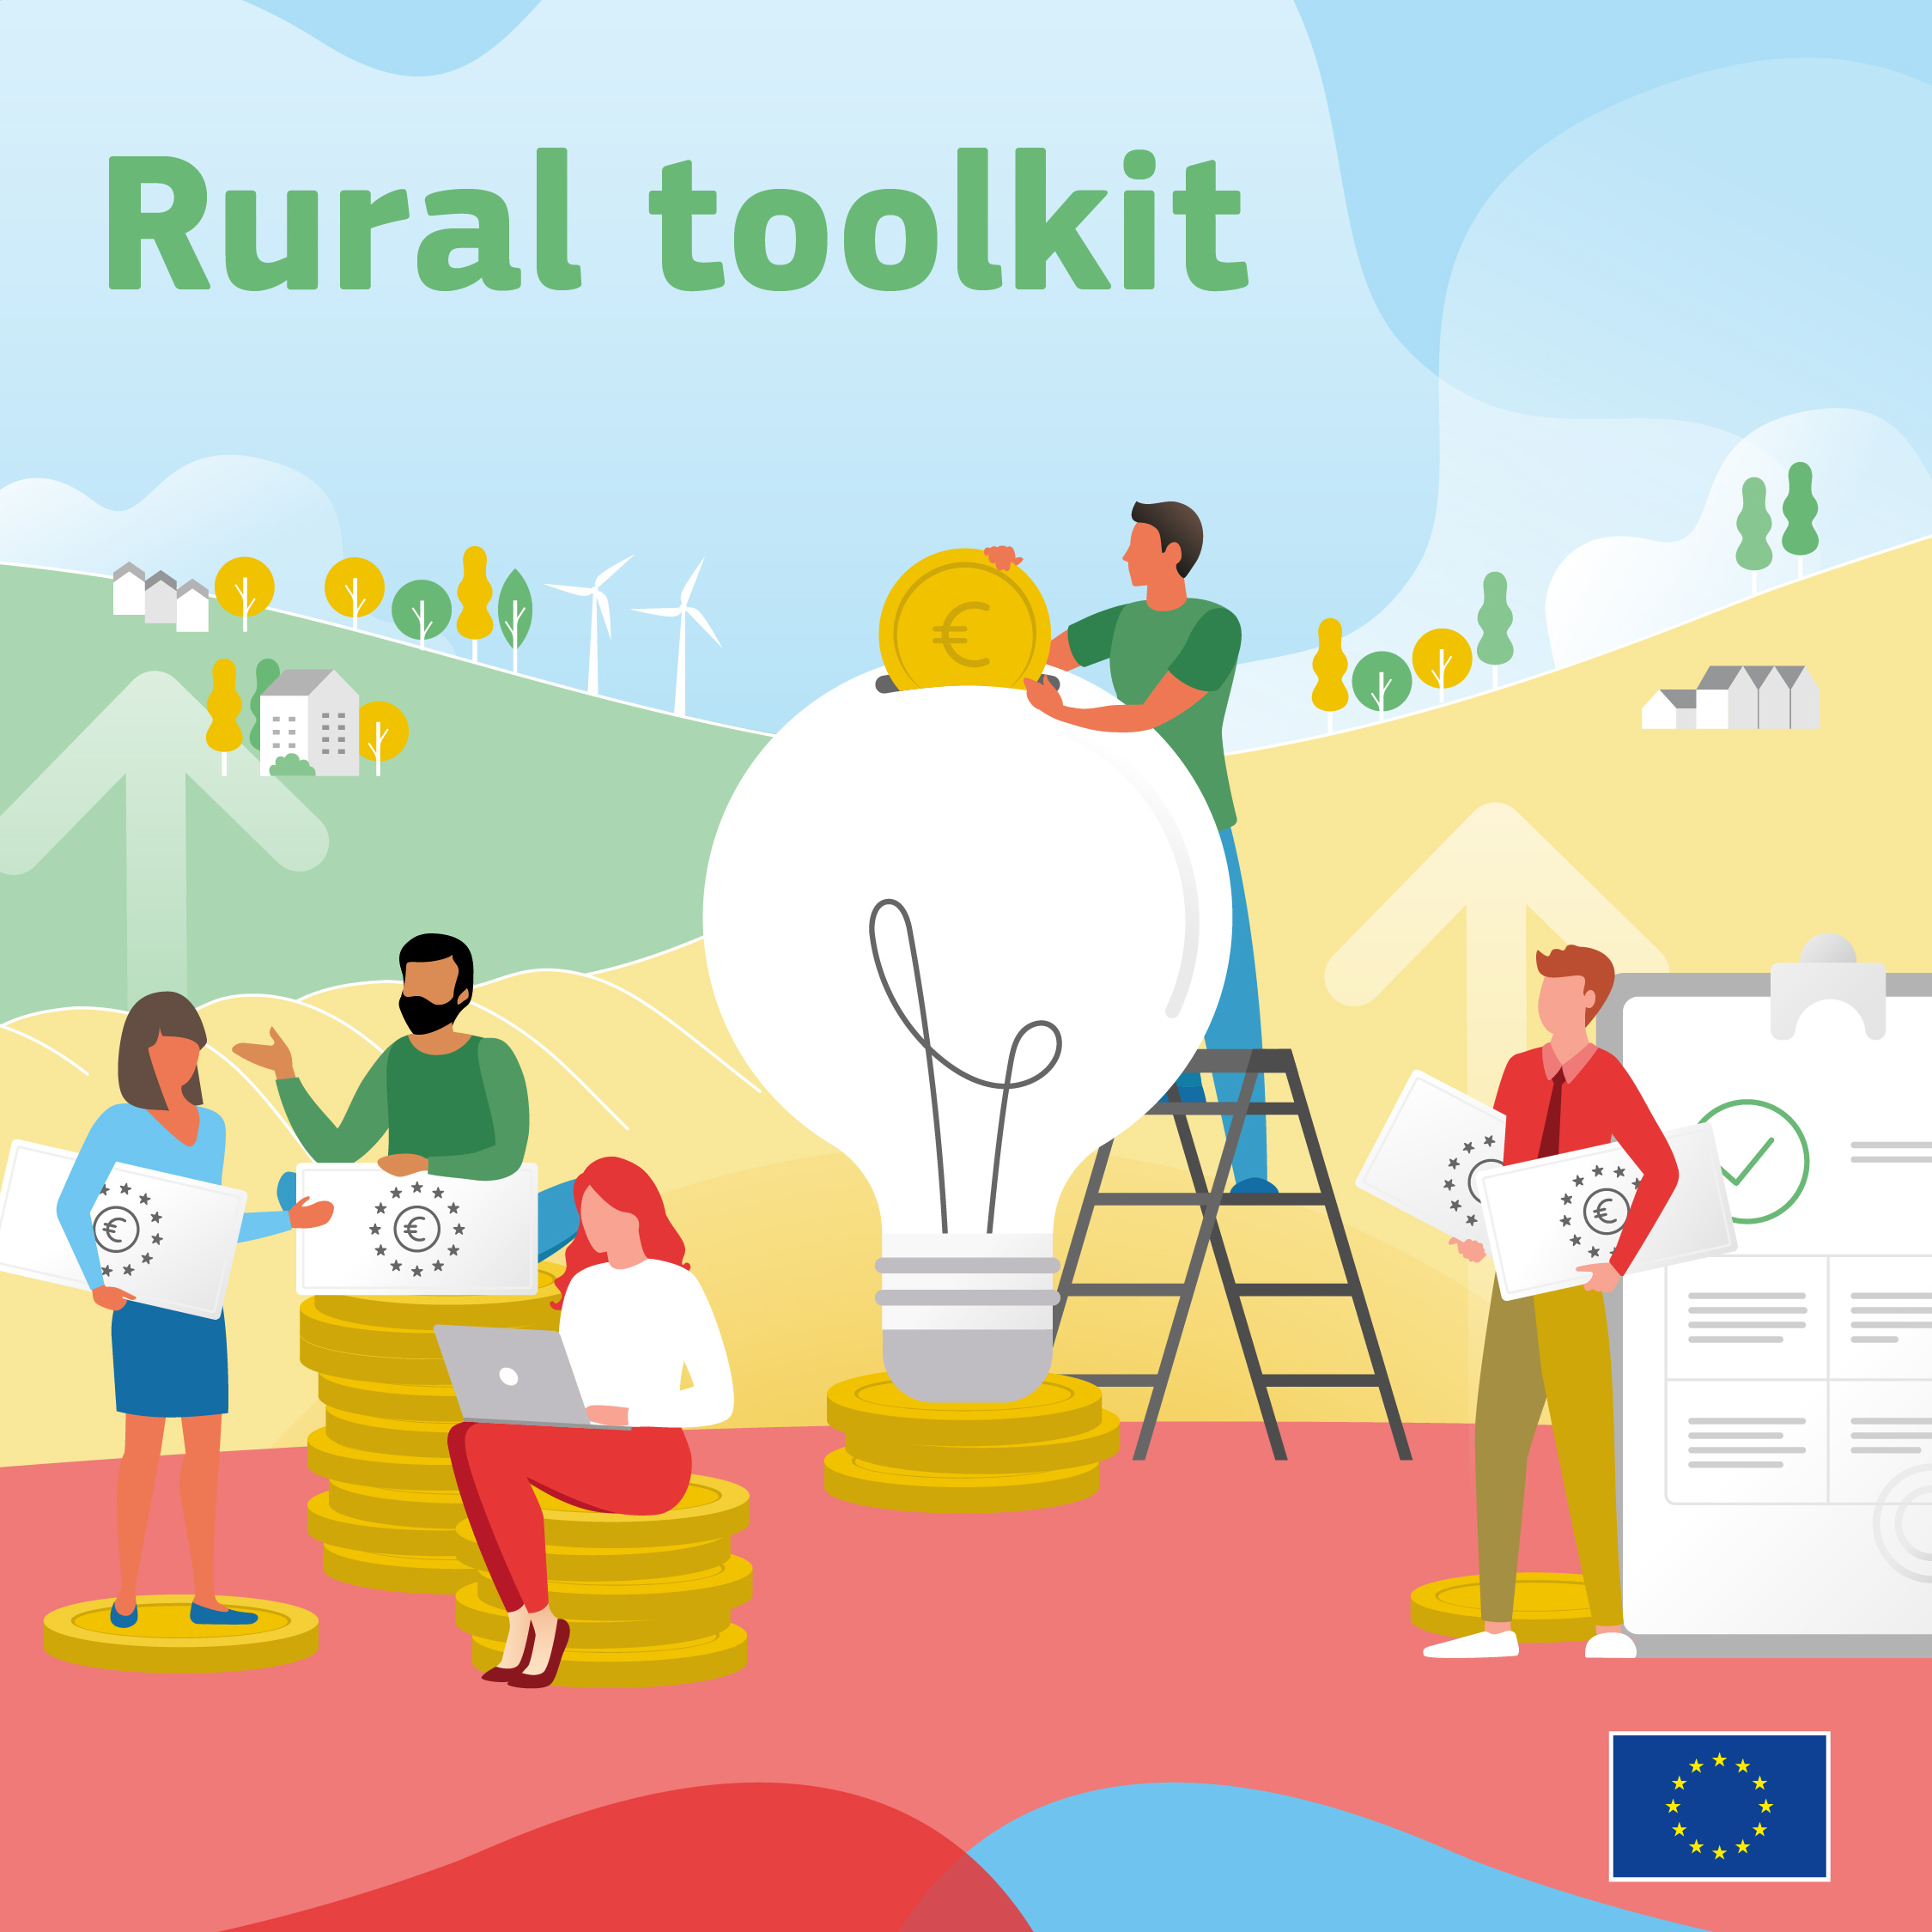 New EU toolkit provides focused support to rural areas